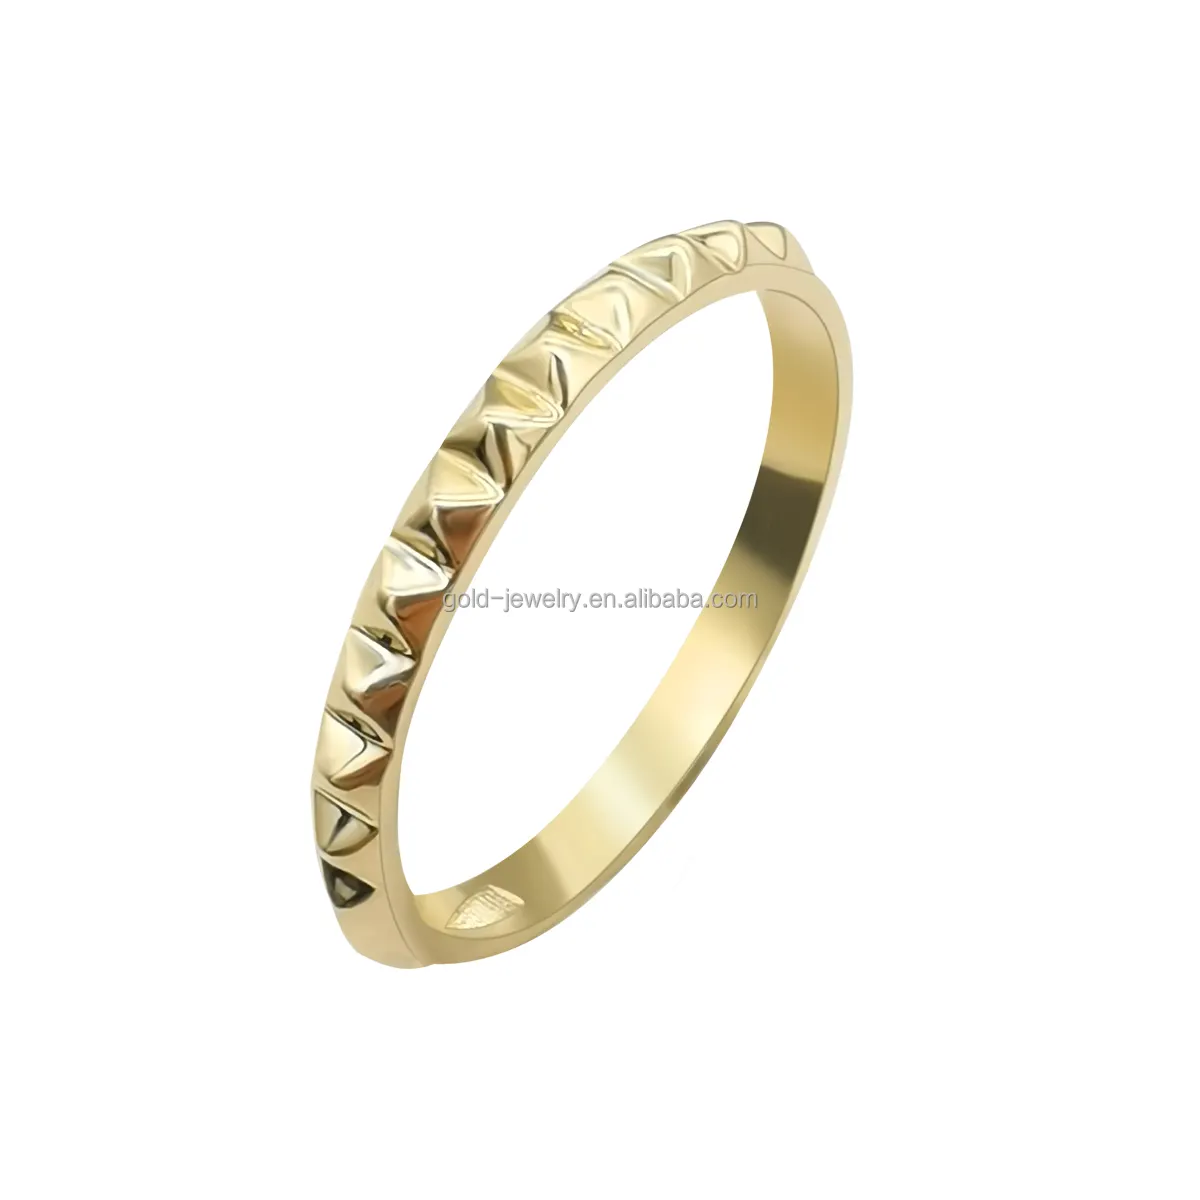 AU375 9K Genuine Real Yellow Gold Rings Women Finger Rings Jewelry Solid Gold Fine Jewelry Wholesale Chinese Gold